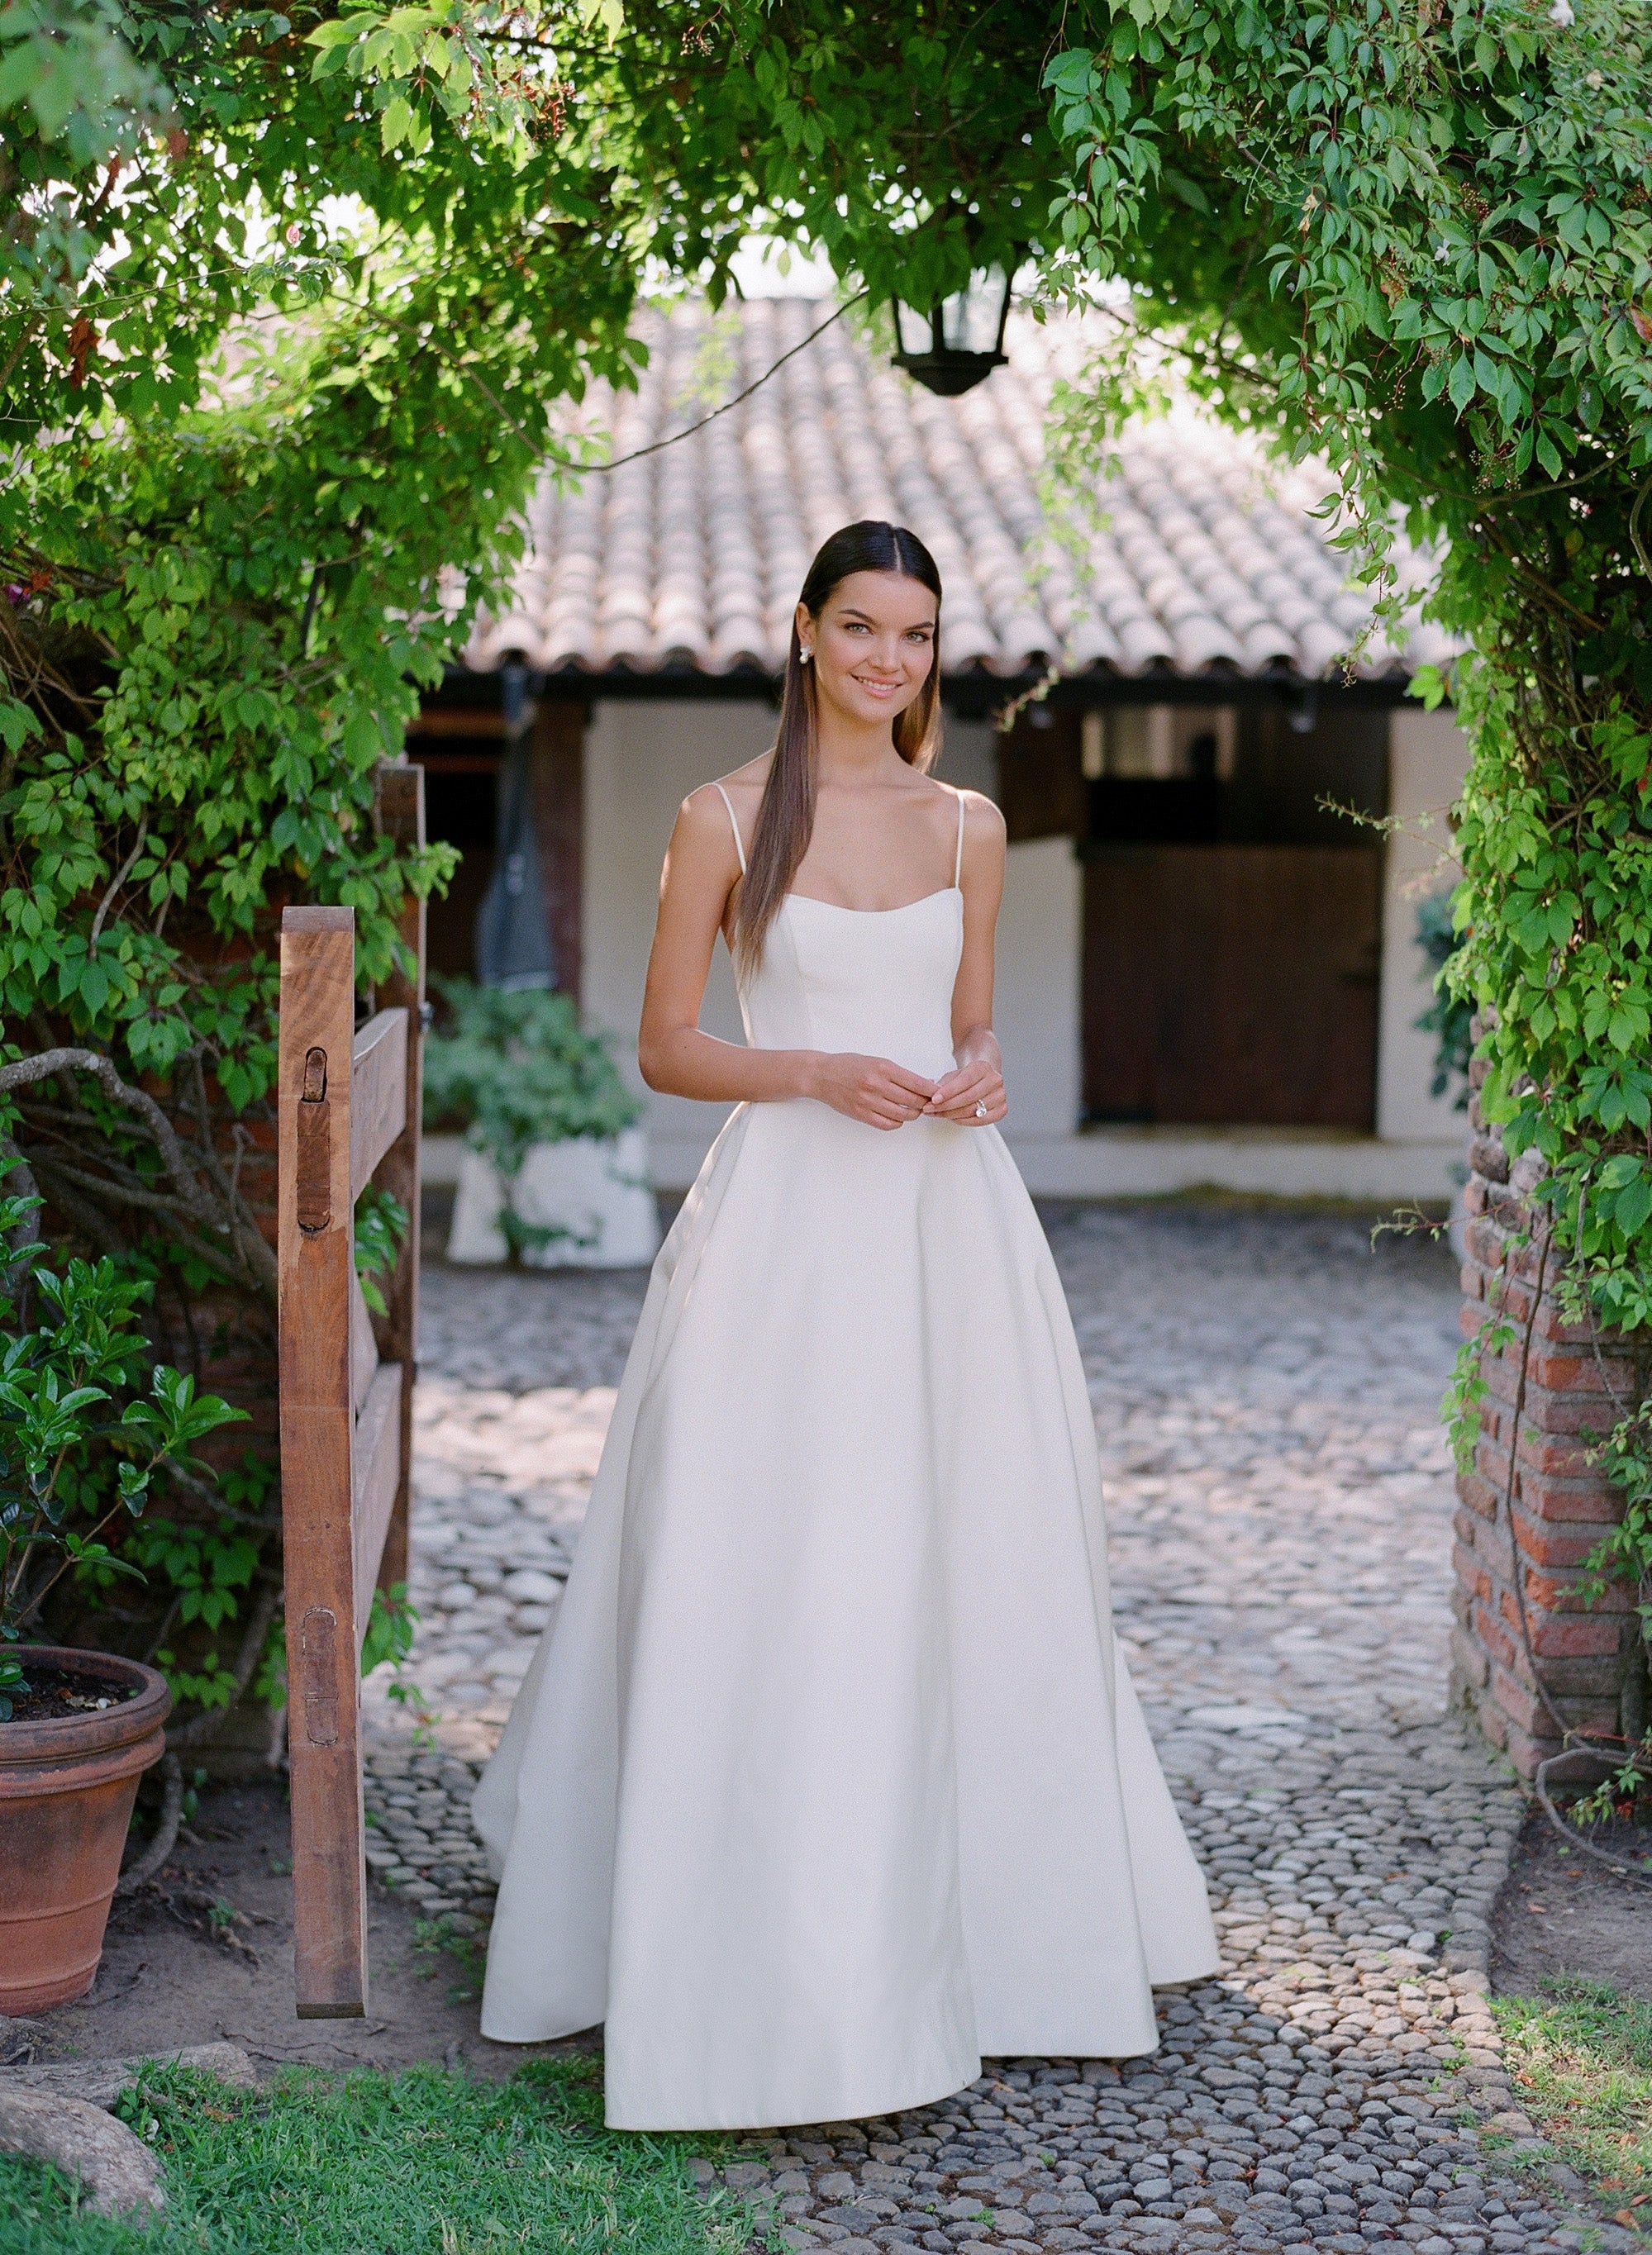 #KleinfeldEditorial We took our newest wedding dresses, bridesmaids dresses and flower girl dresses from Kleinfeld Bridal and Kleinfeld Bridal Party down to the Hacienda San Antonio in Colima Mexico for a stunning editorial photoshoot—here is all the destination wedding venue inspiration you need!